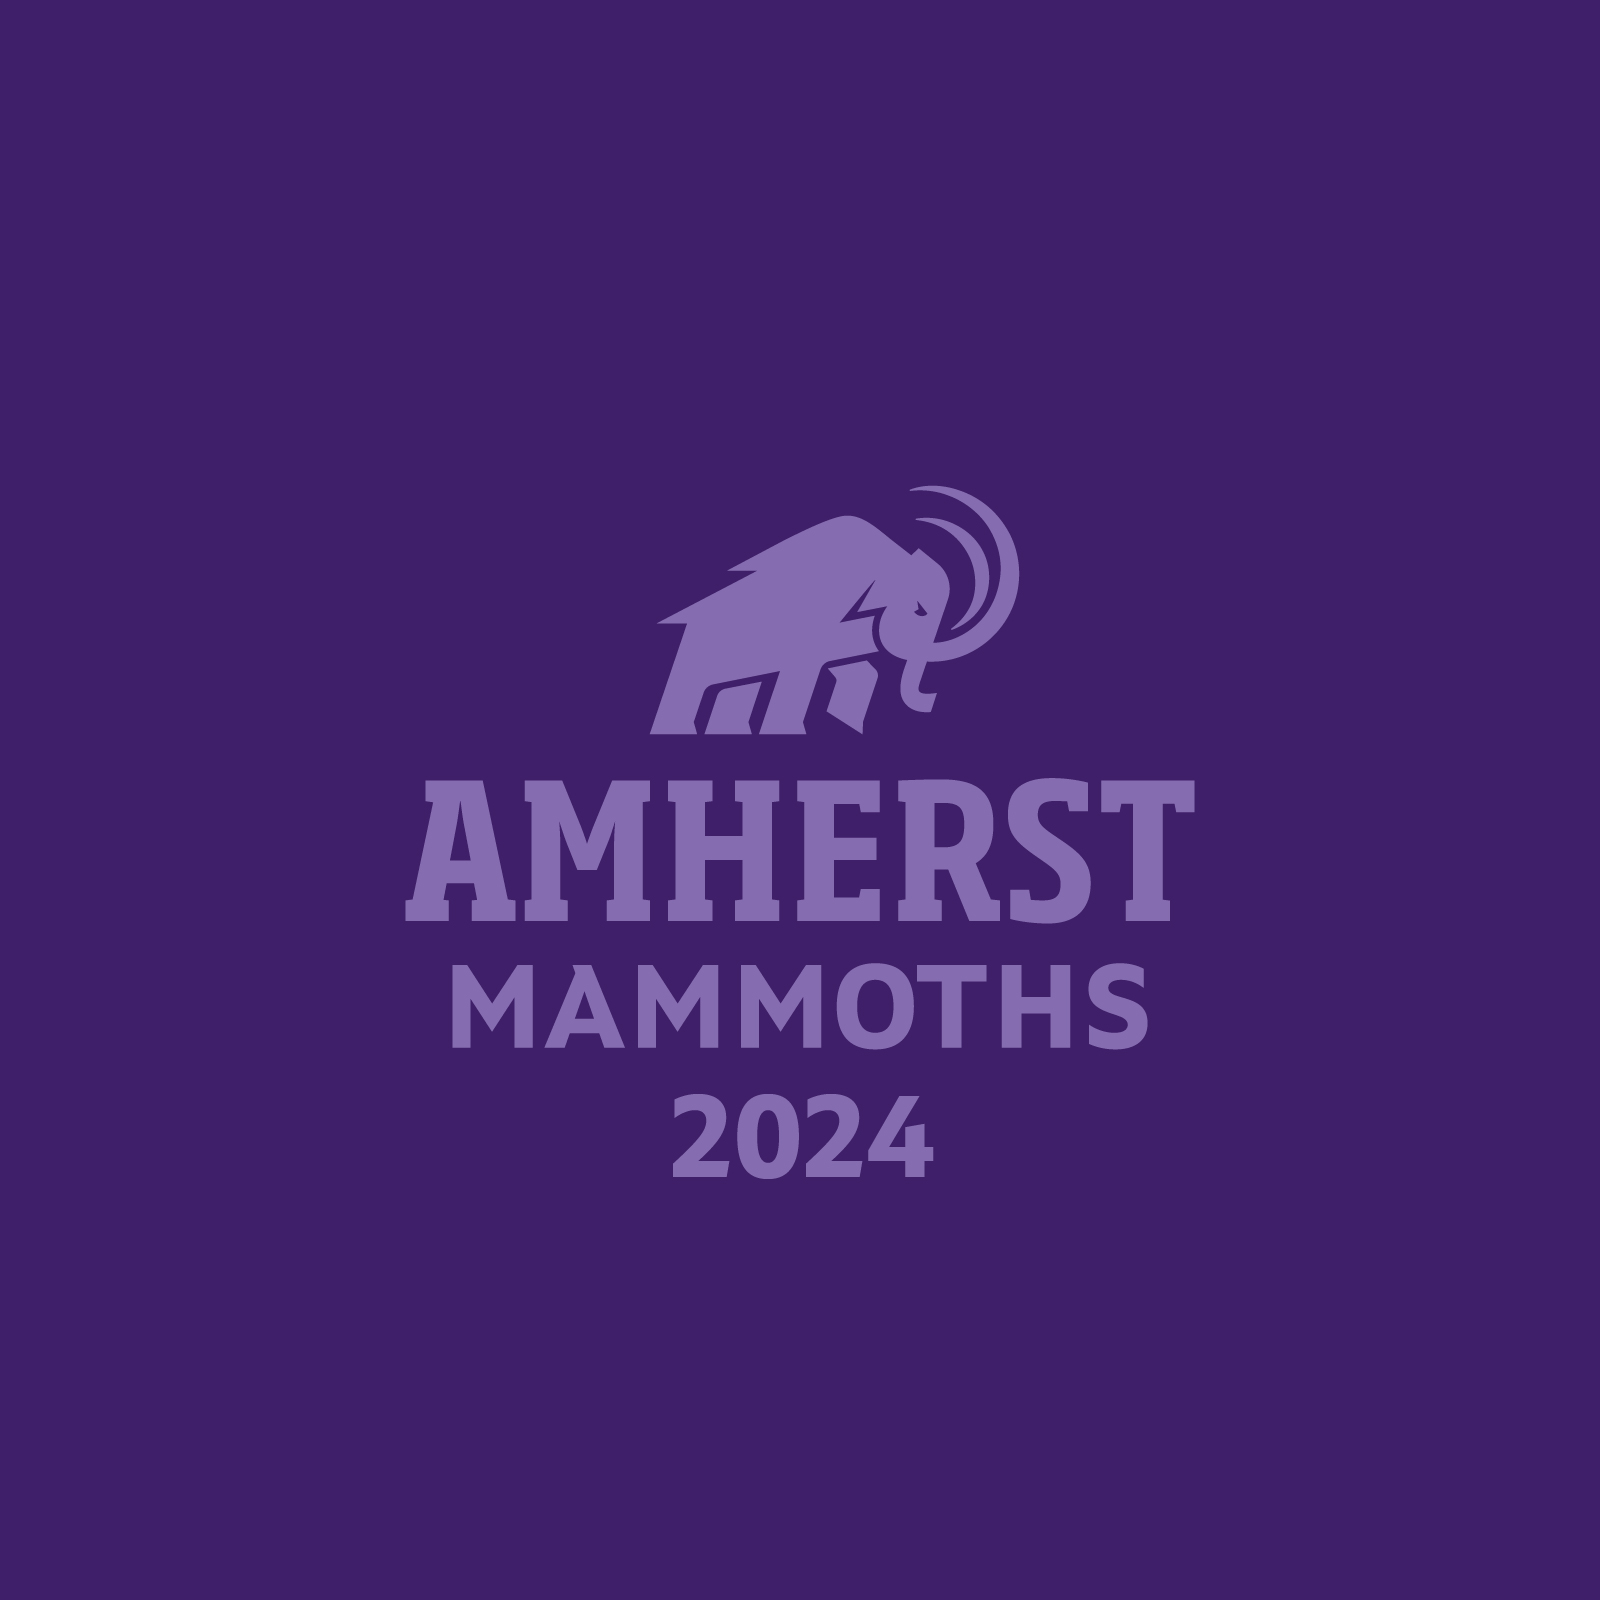 Amherst Mammoths 2024 with mammoth on purple background